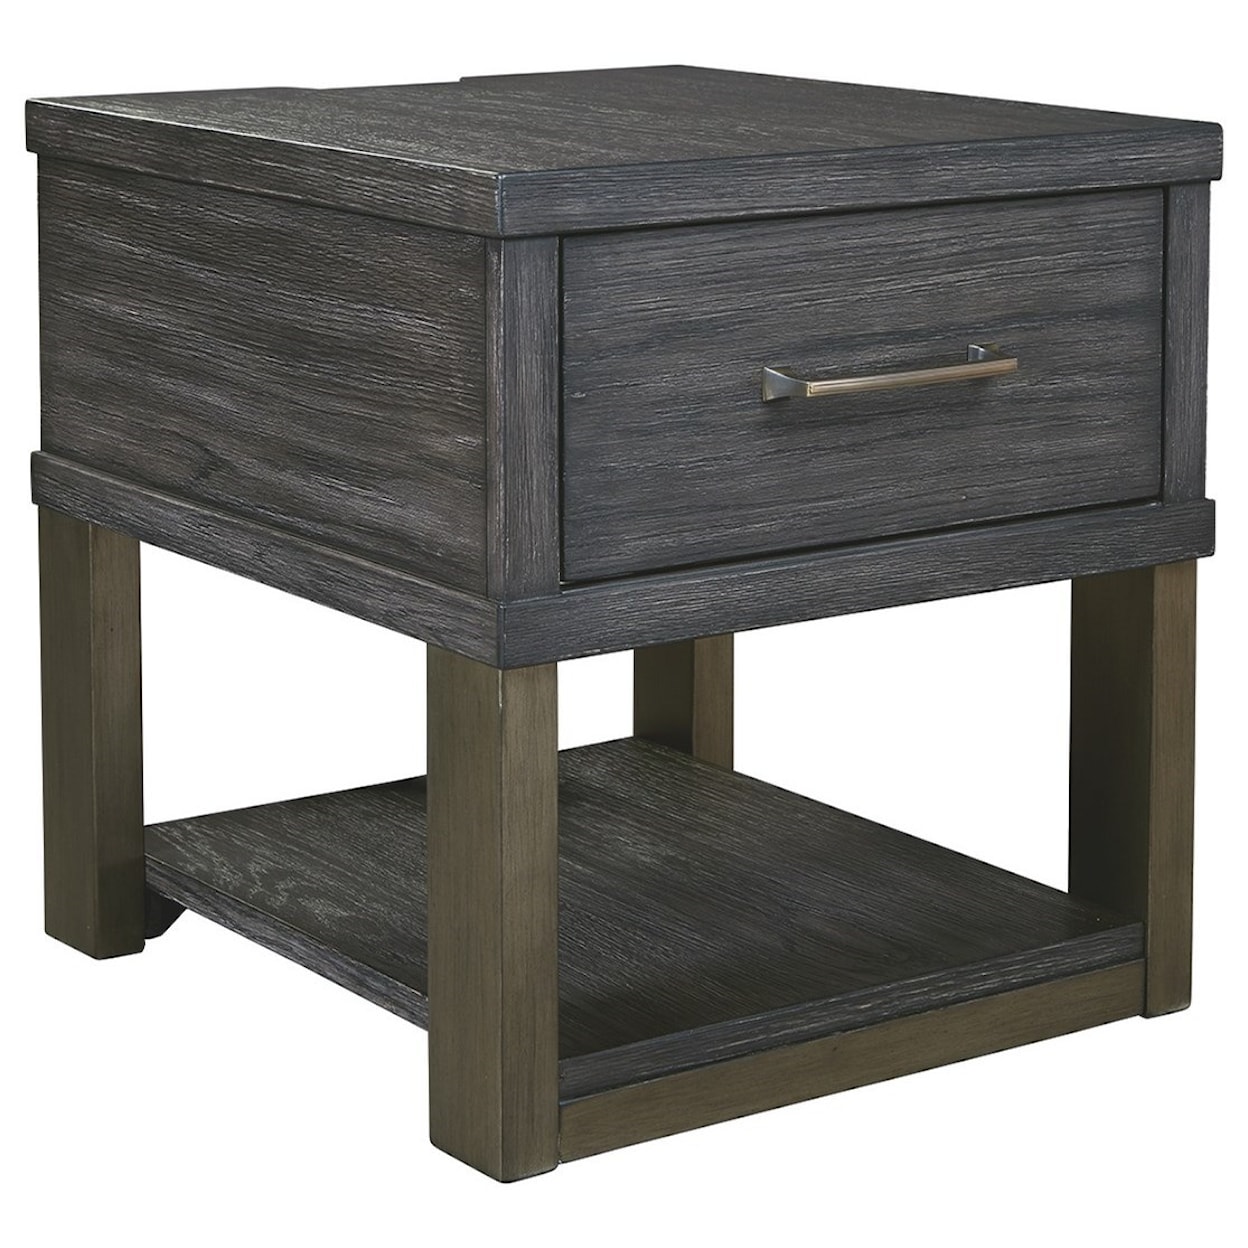 Signature Design by Ashley Forleeza End Table